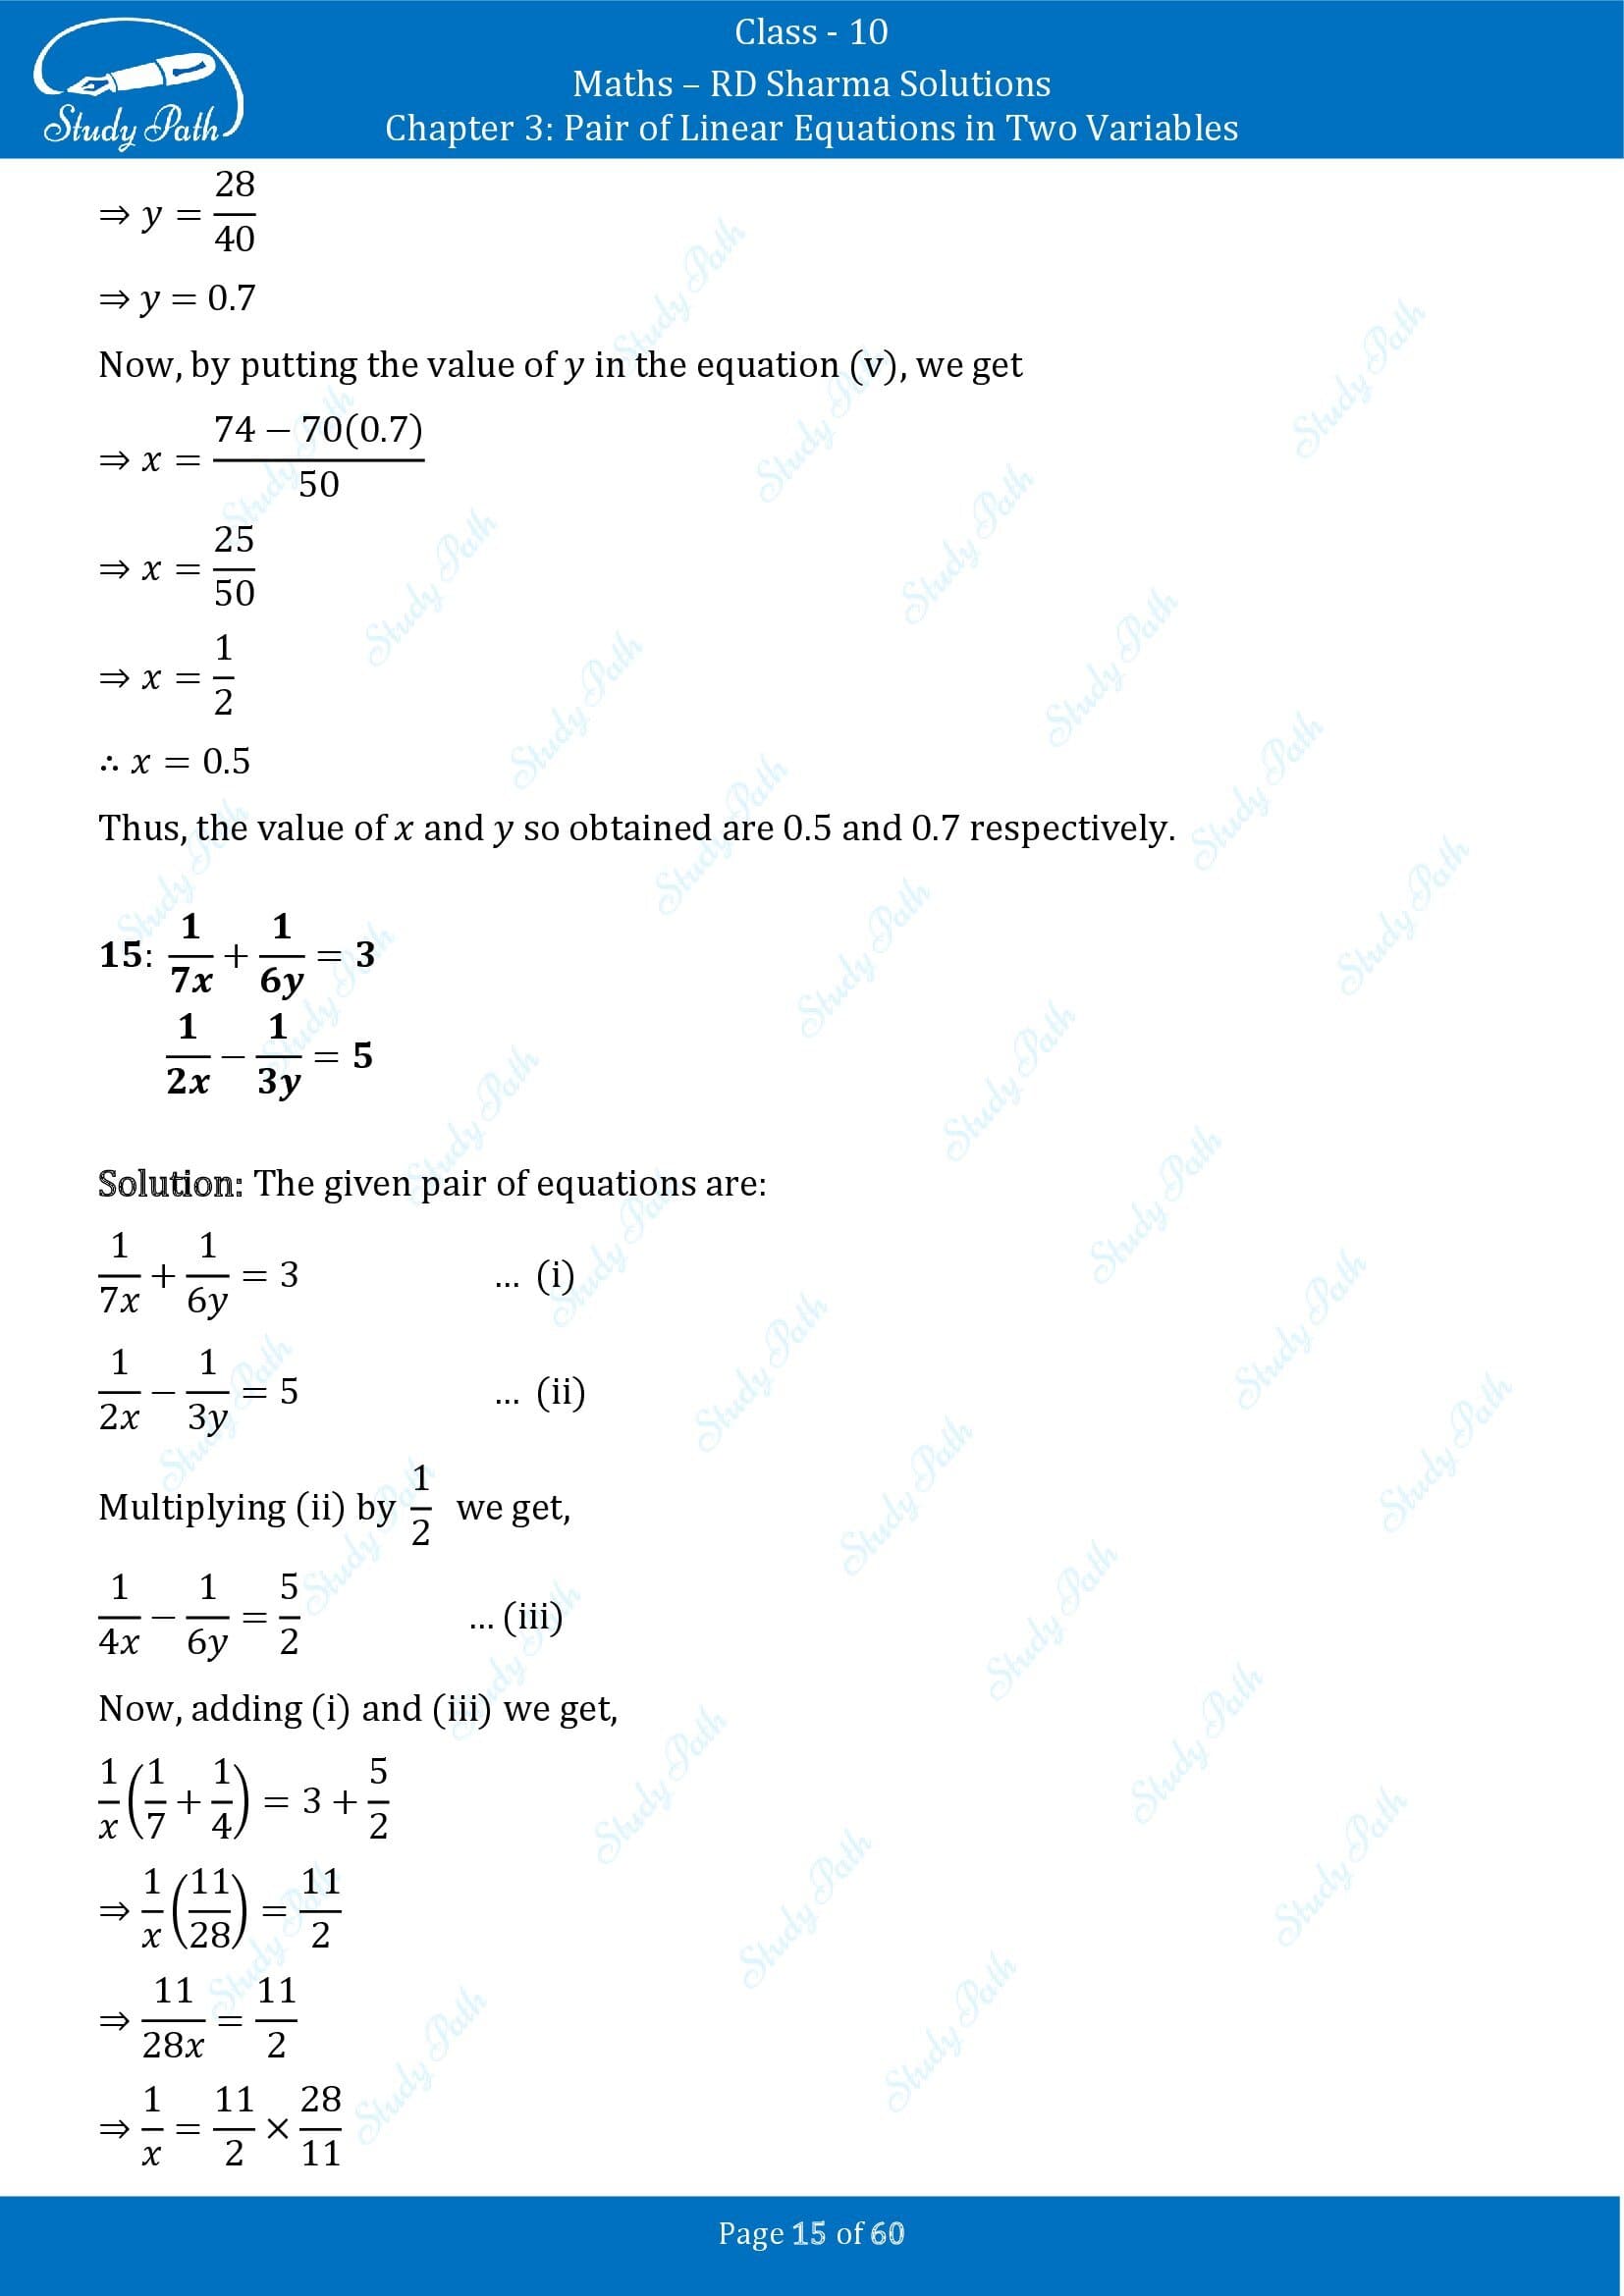 RD Sharma Solutions Class 10 Chapter 3 Pair of Linear Equations in Two Variables Exercise 3.3 00015